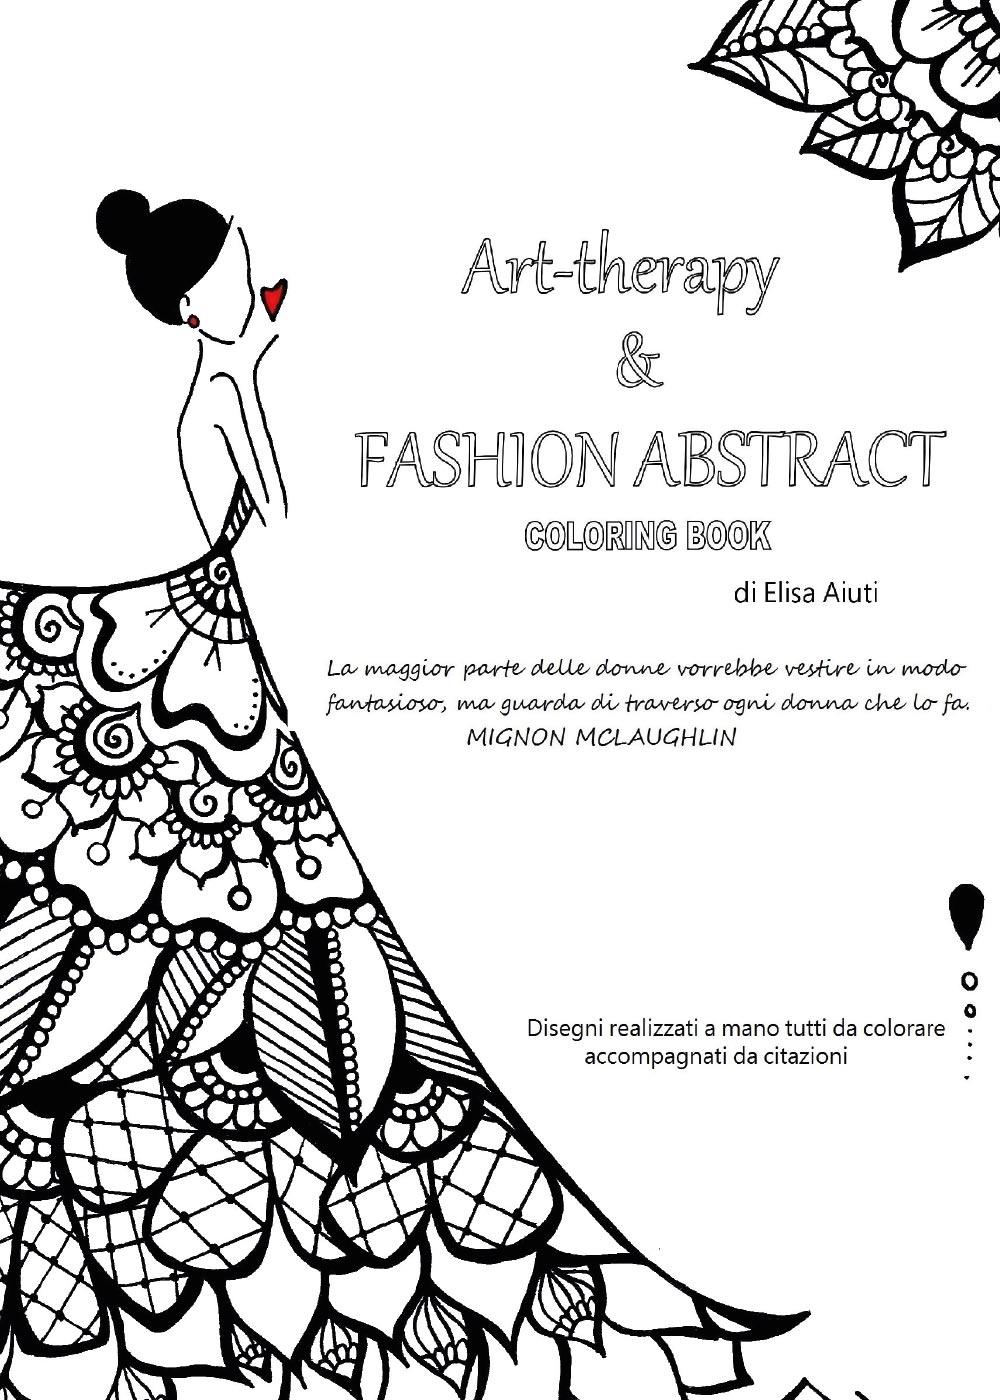 Art-Therapy & Fashion Abstract, Coloring Book